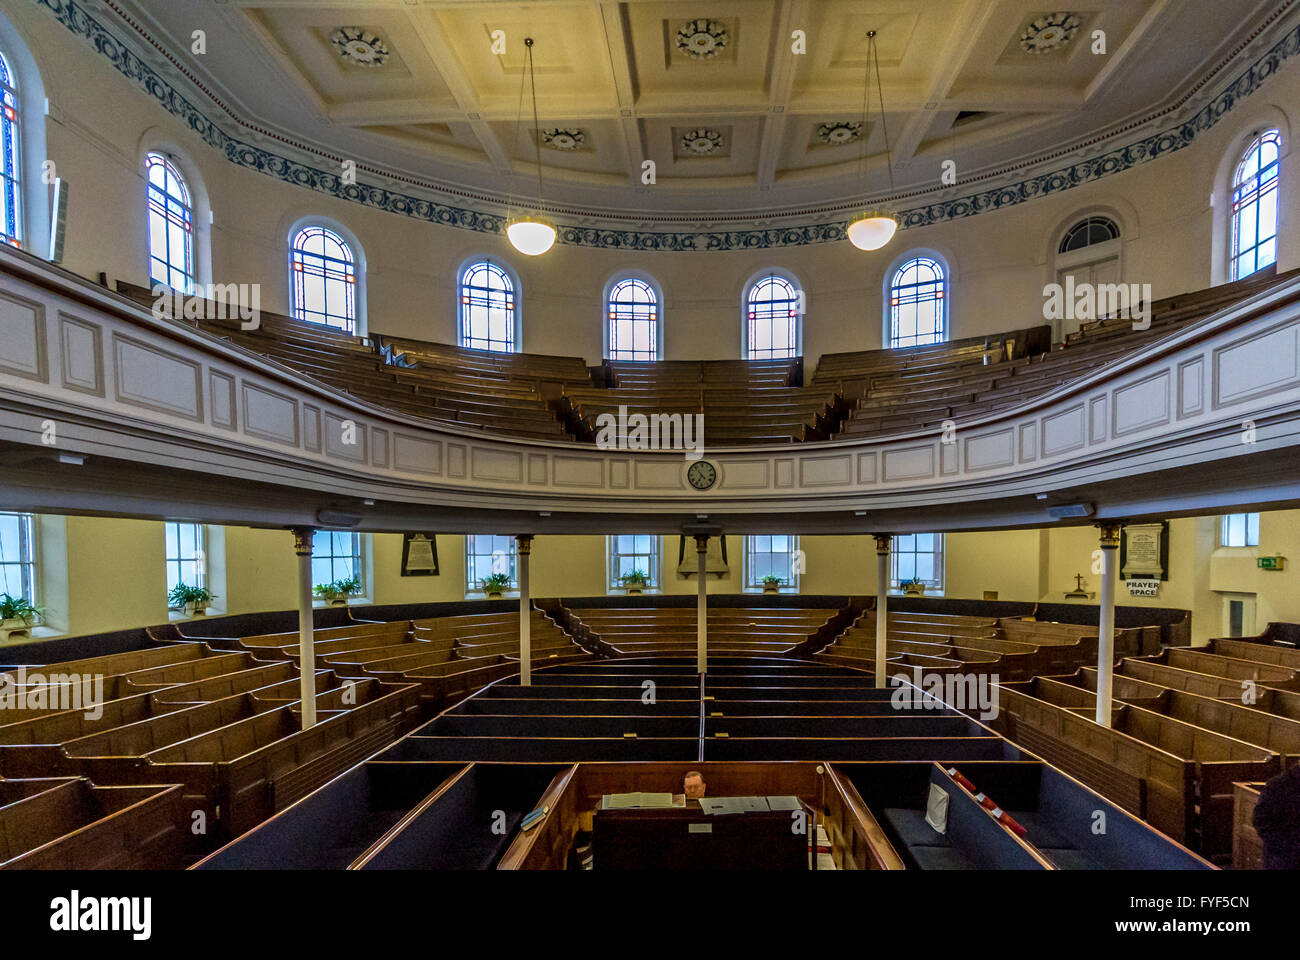 View from Pulpit. York Central Methodist Church, York, UK. Stock Photo